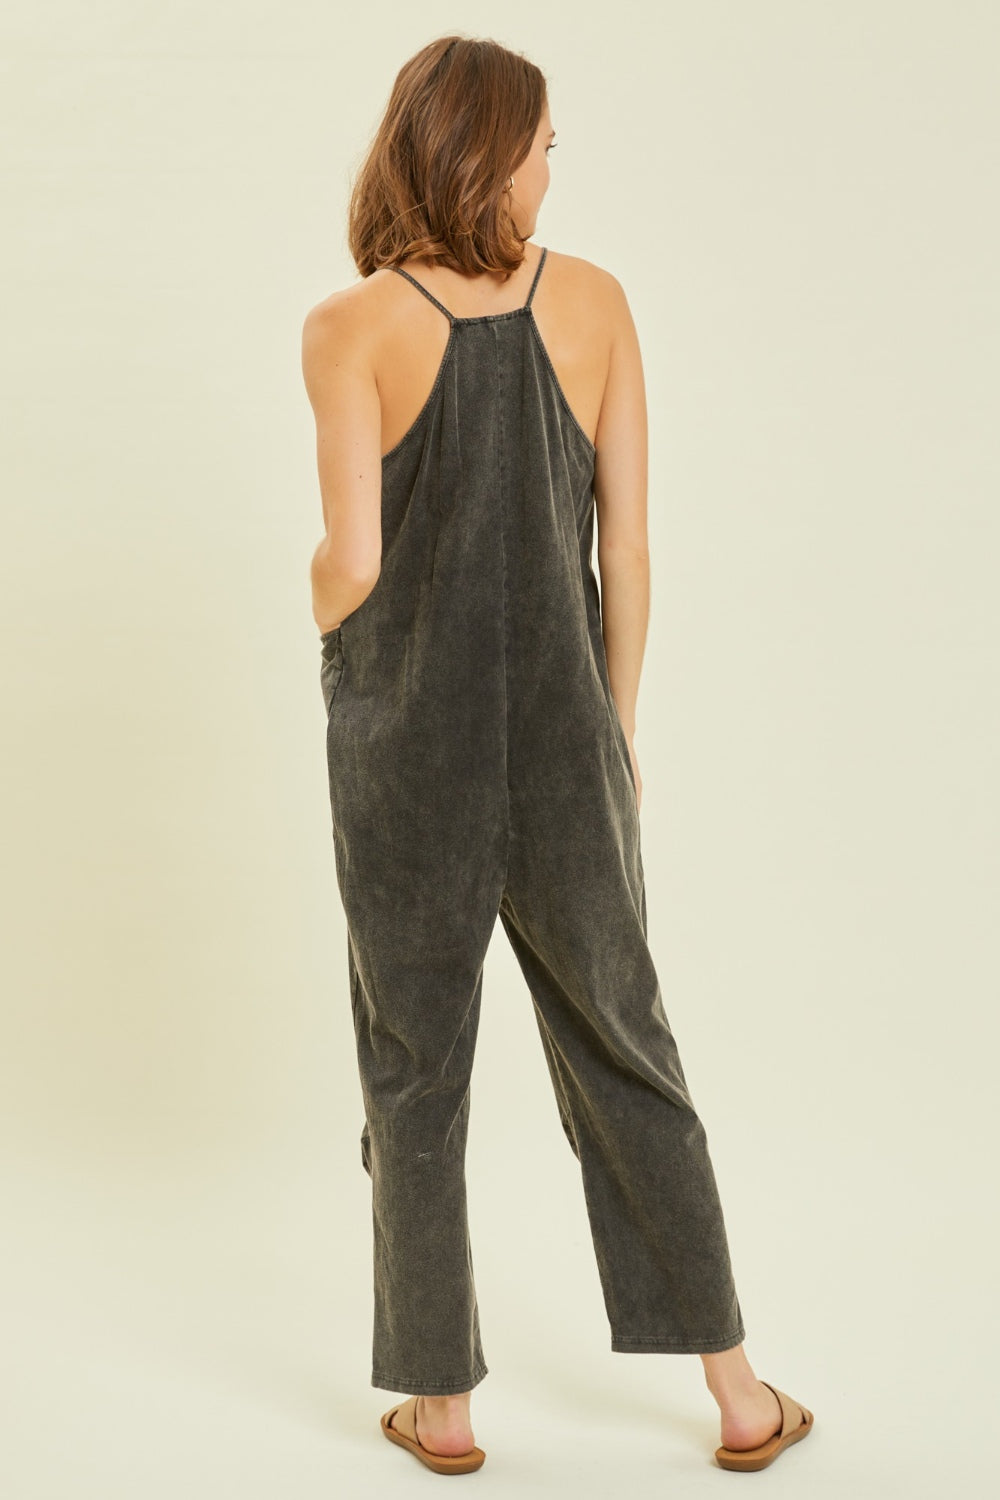 HEYSON Mineral-Washed Oversized Jumpsuit with Pockets